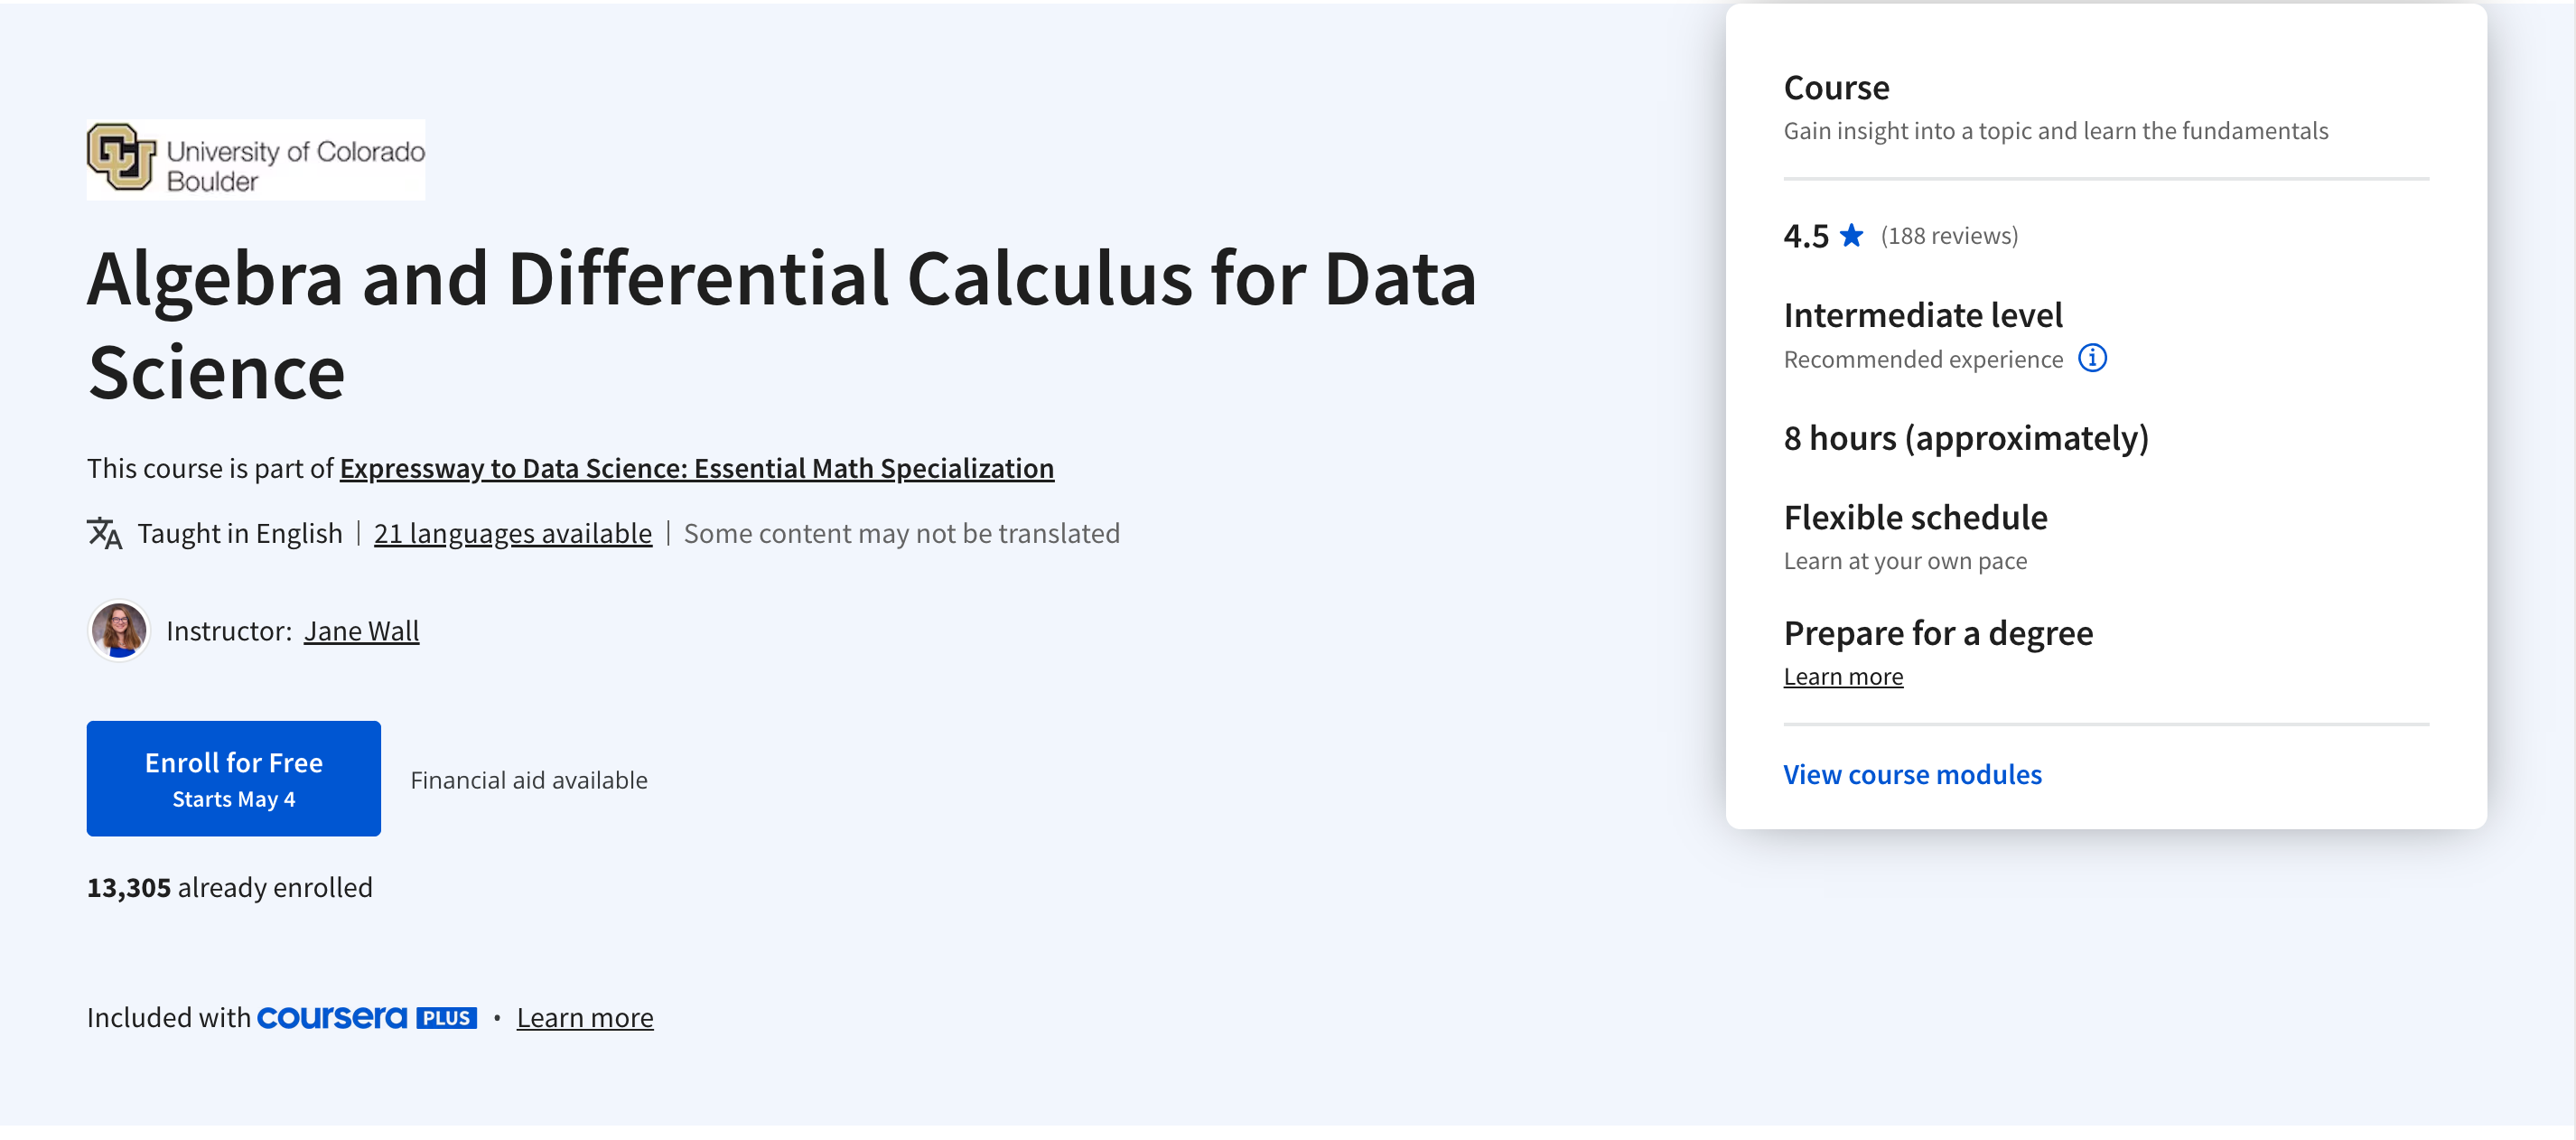 Linear Algebra & Differential Calculus for Data Science